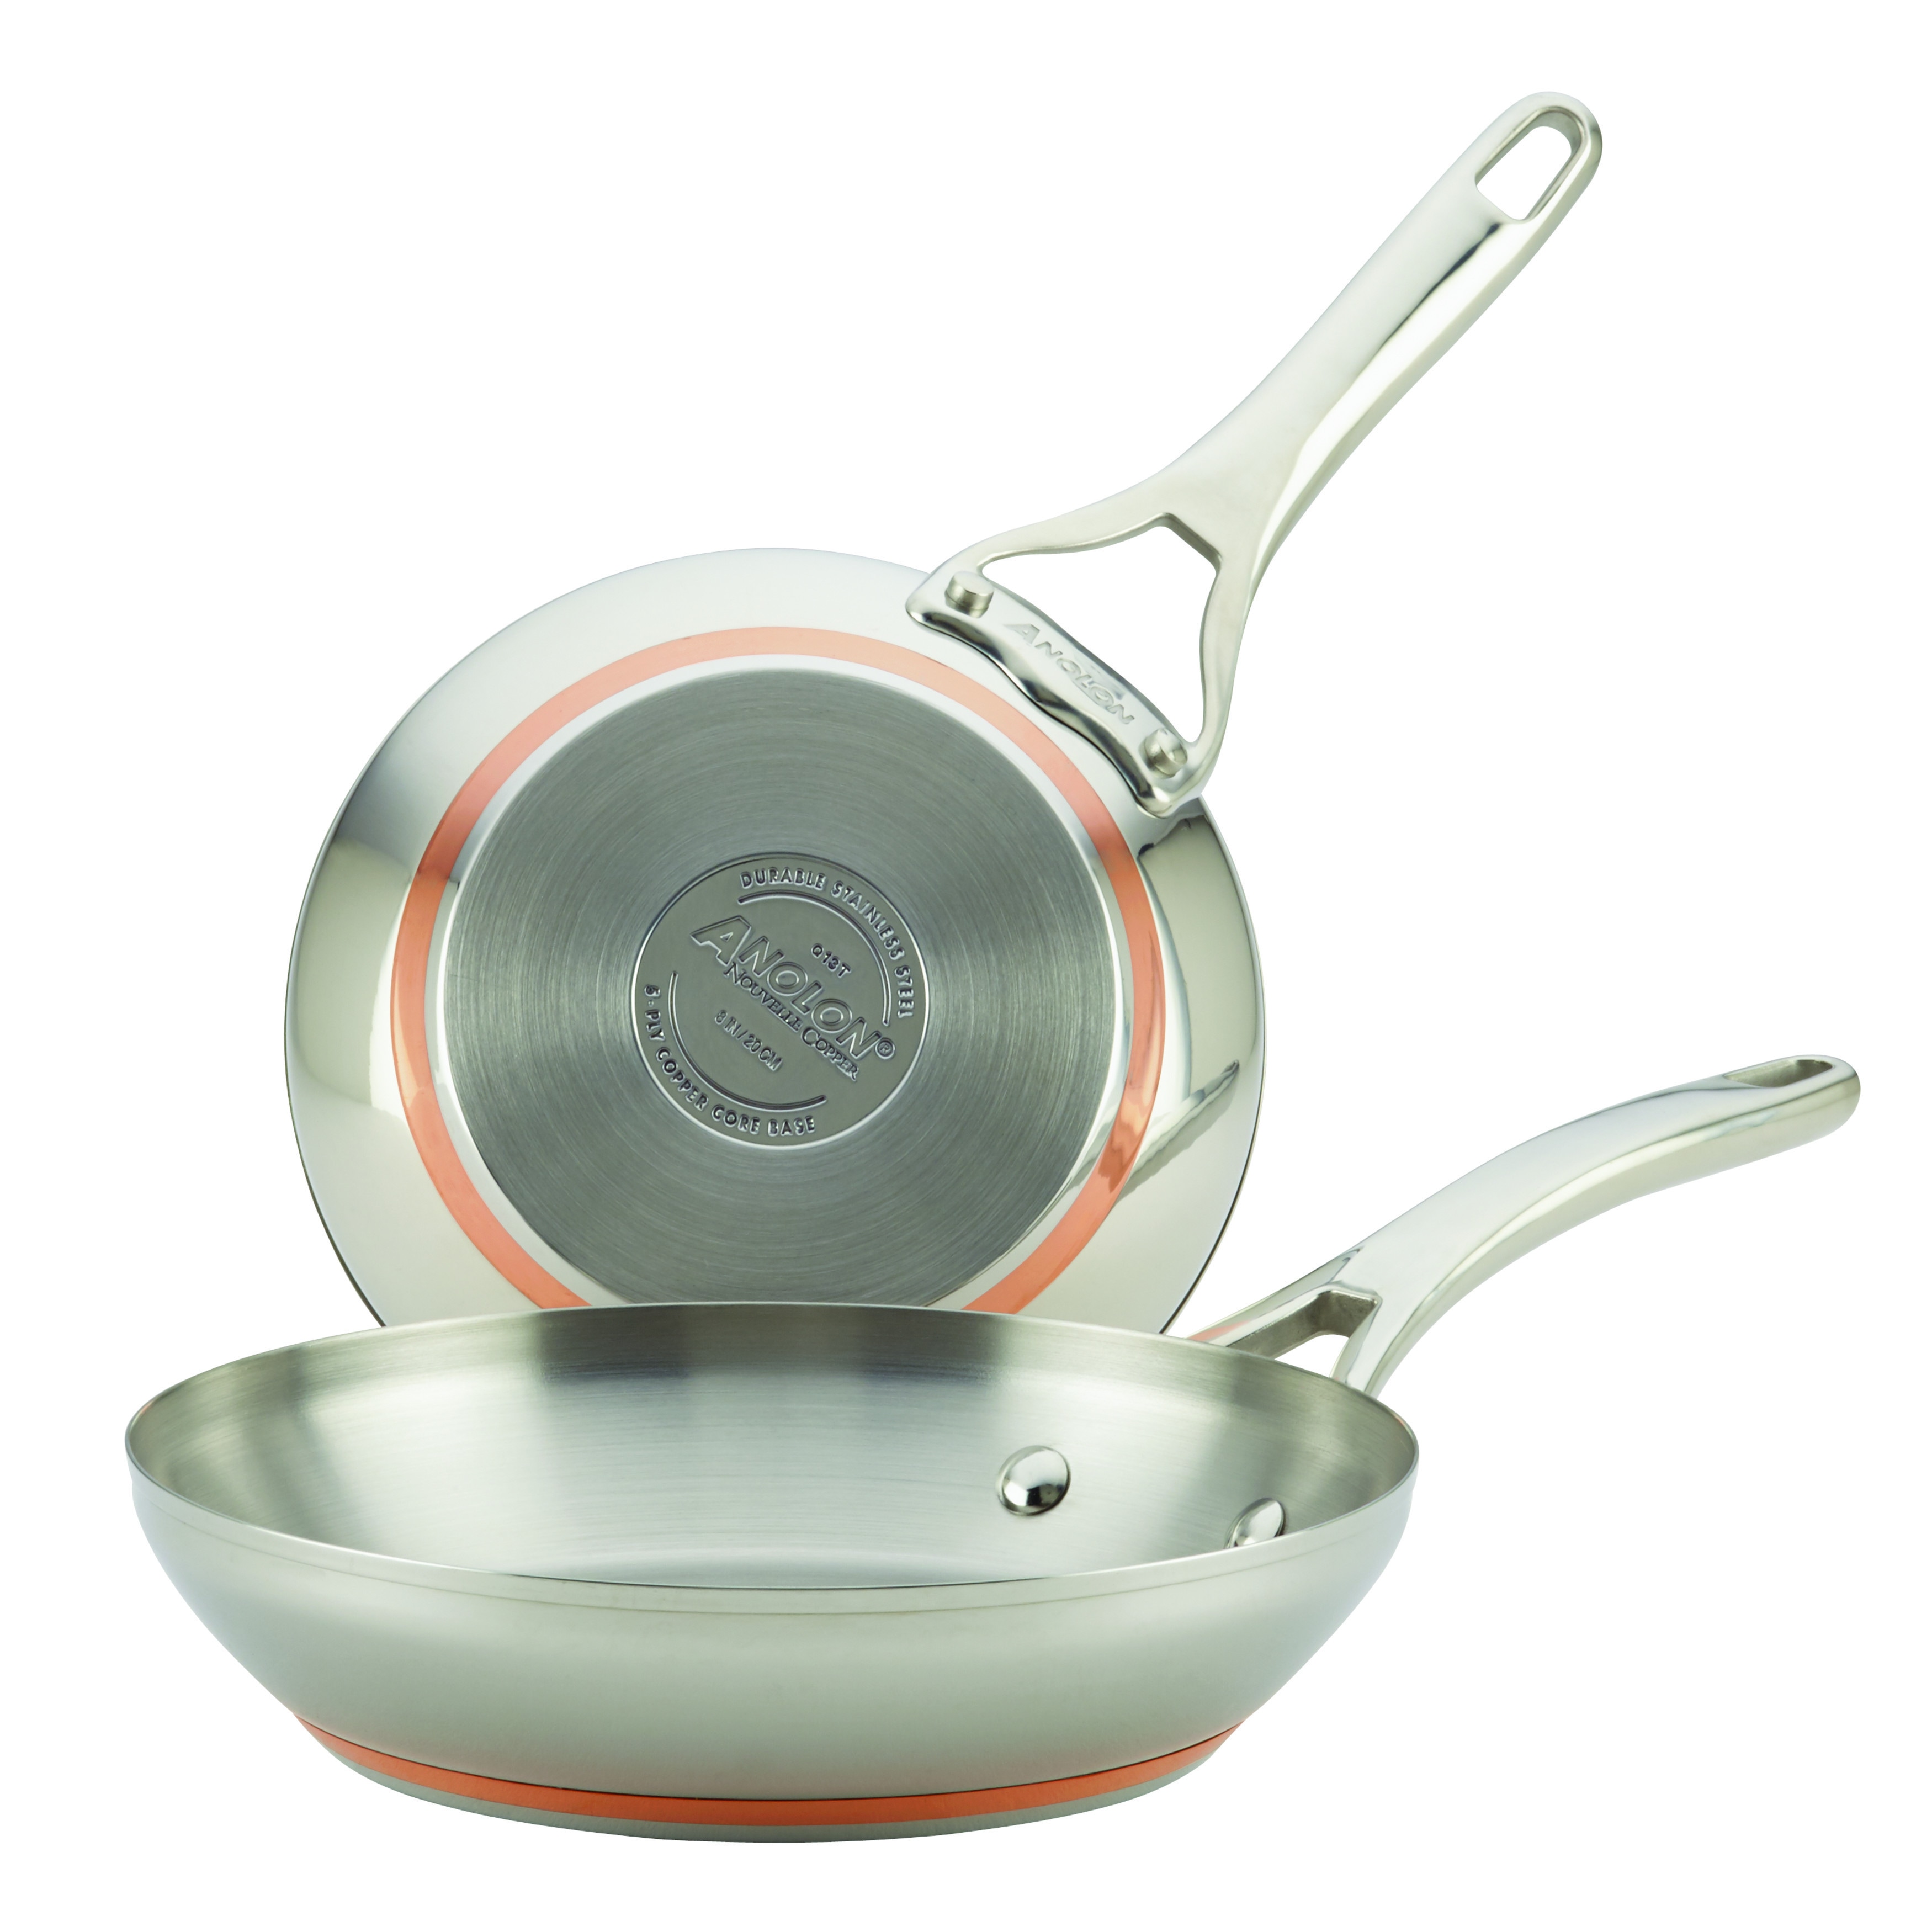 Copper Core 5-Play 8in Skillet, Stainless Steel Pan